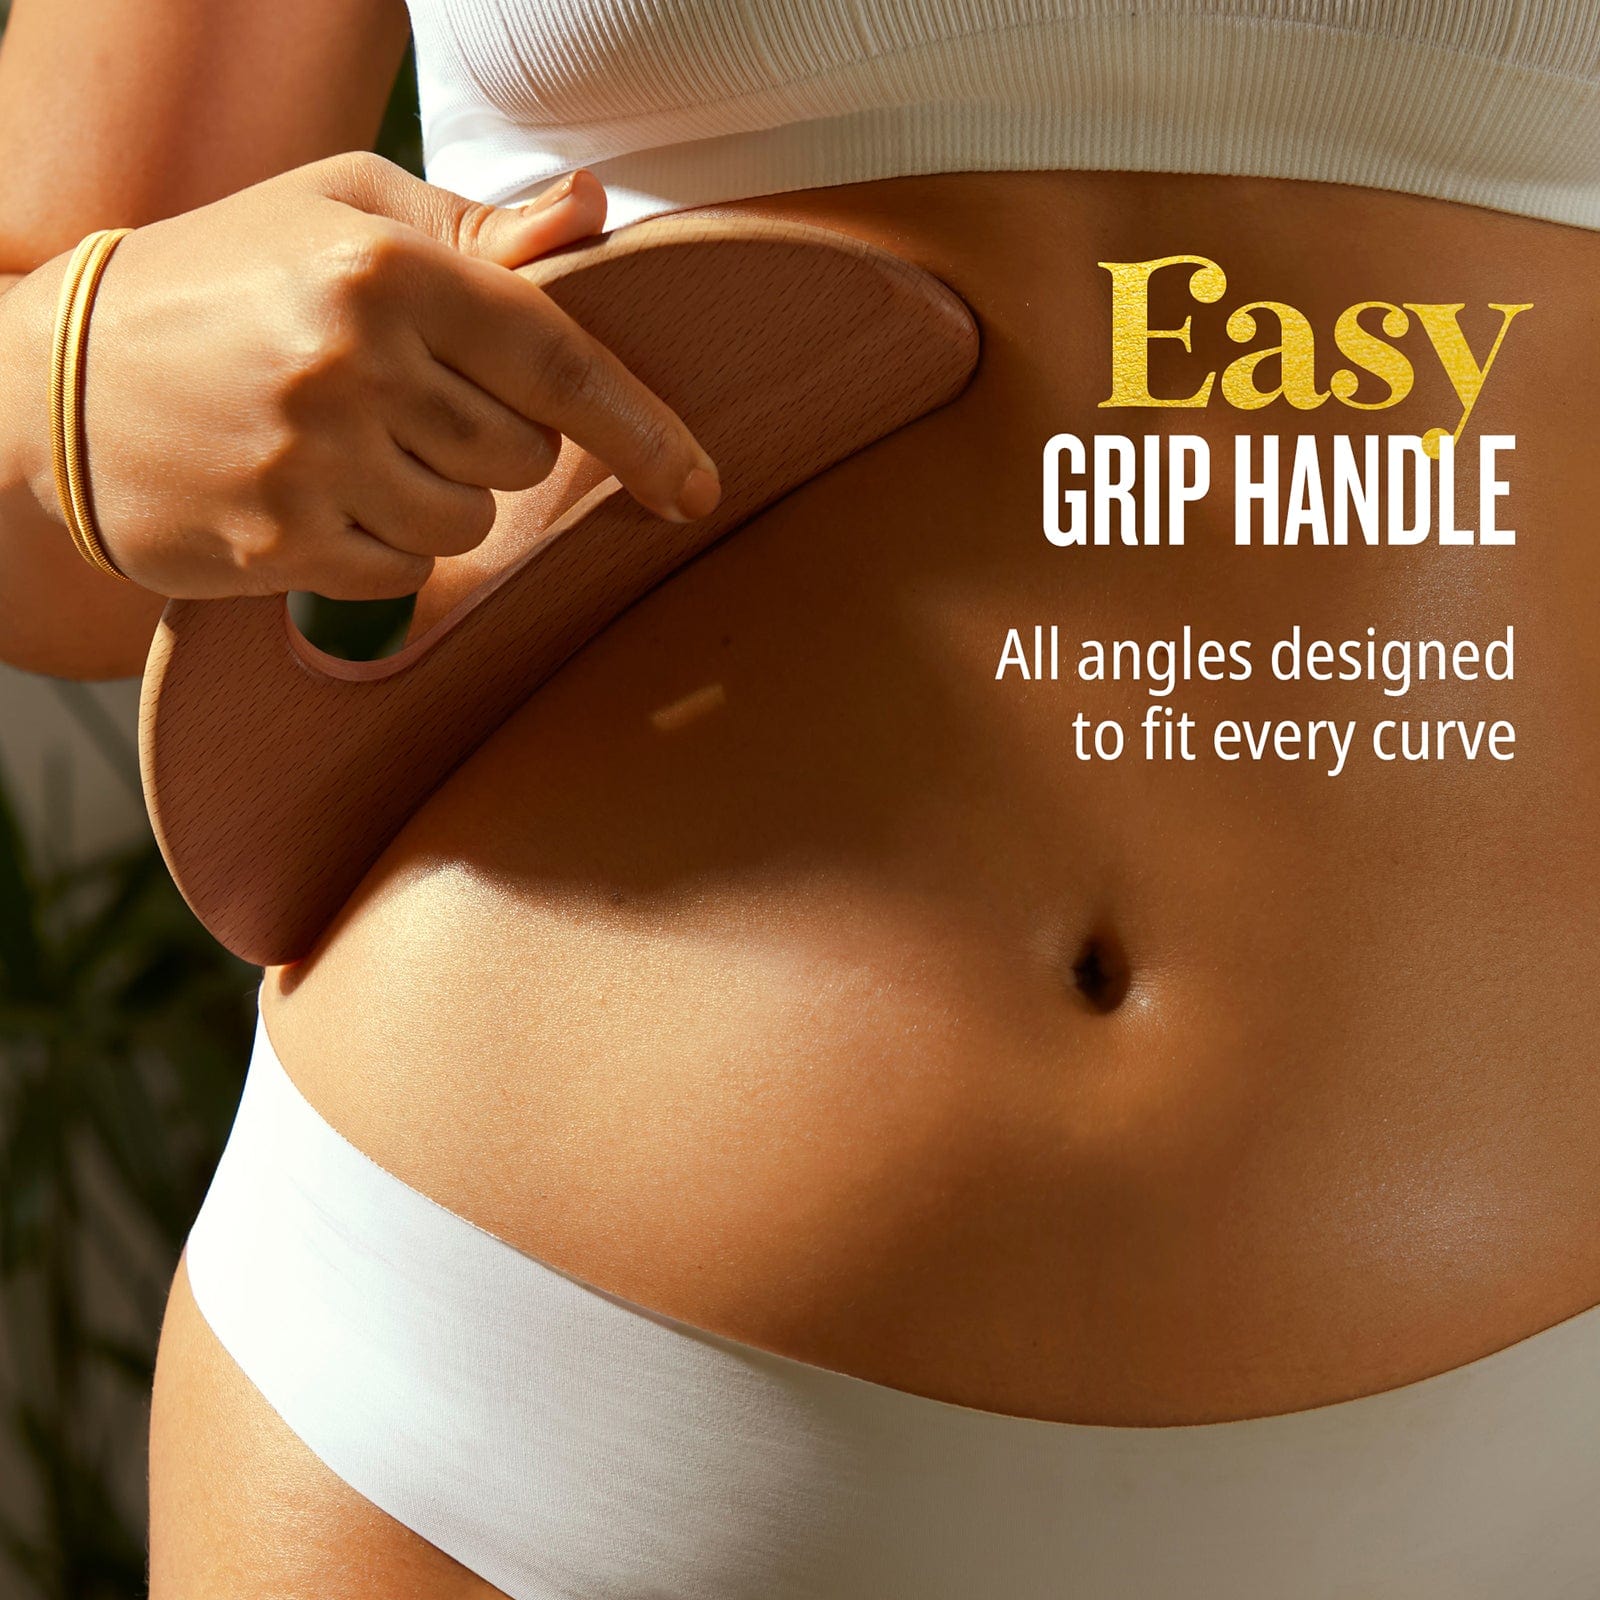 Easy grip handle, all angles designed to fit every curve